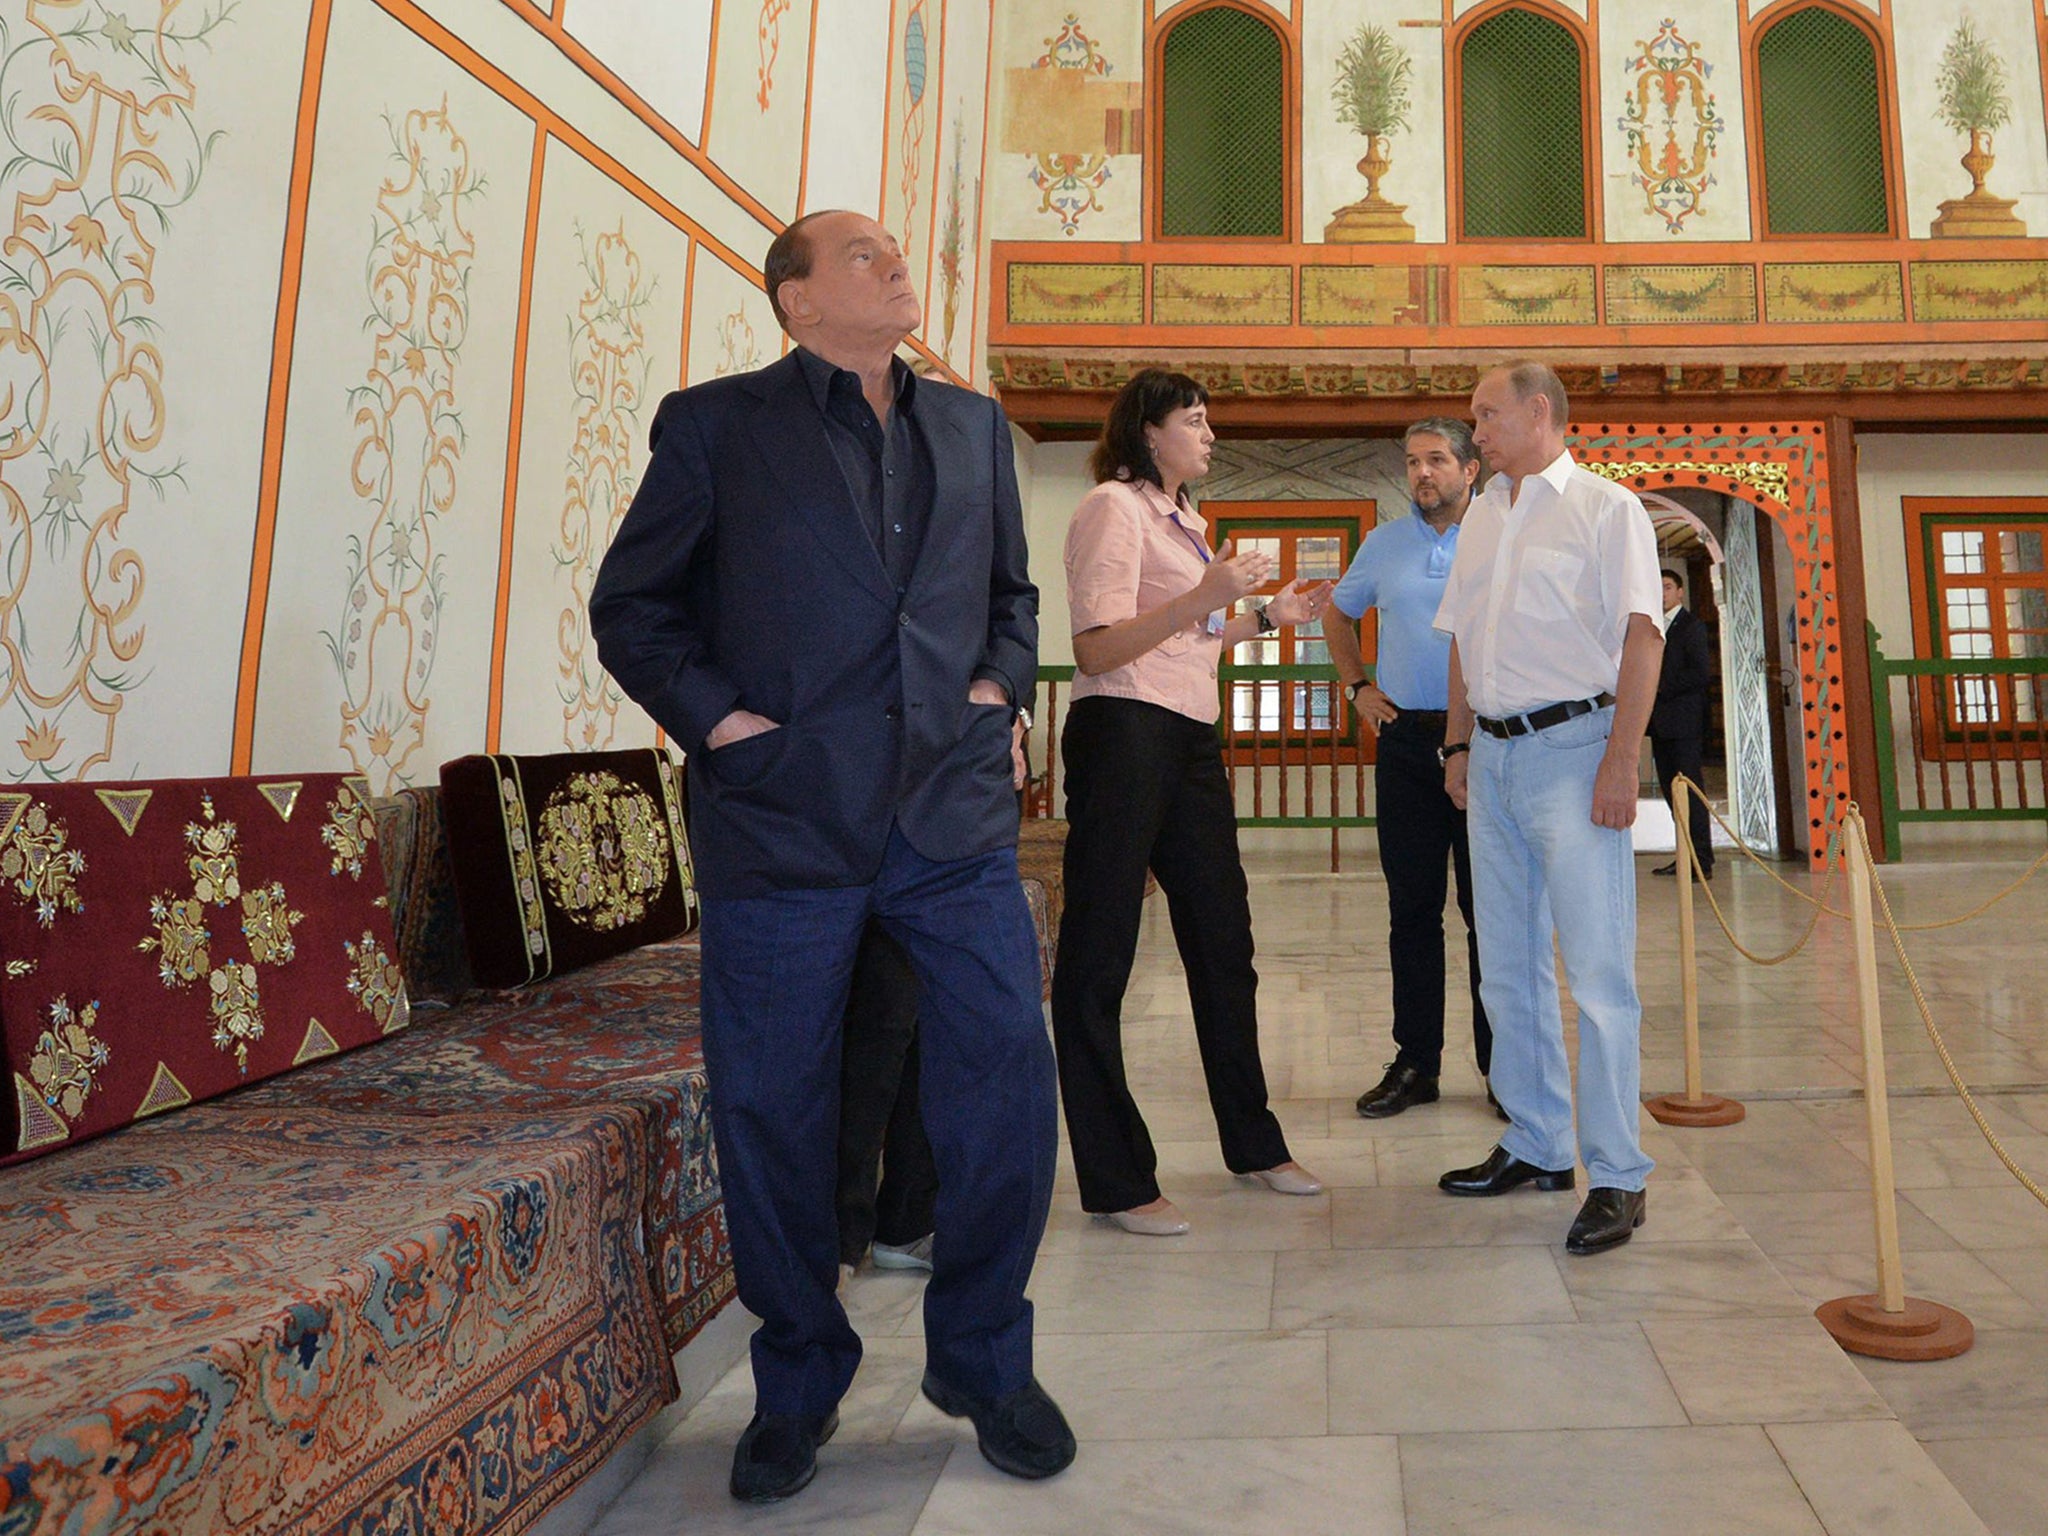 Russian President Vladimir Putin (R) and Italy's former prime minister Silvio Berlusconi (L) examine the Khan's Palace, a former residence of the Crimean Khanate, while visiting the Bakhchisaray Historical and Cultural Preserve in Bakhchisaray, Crimea